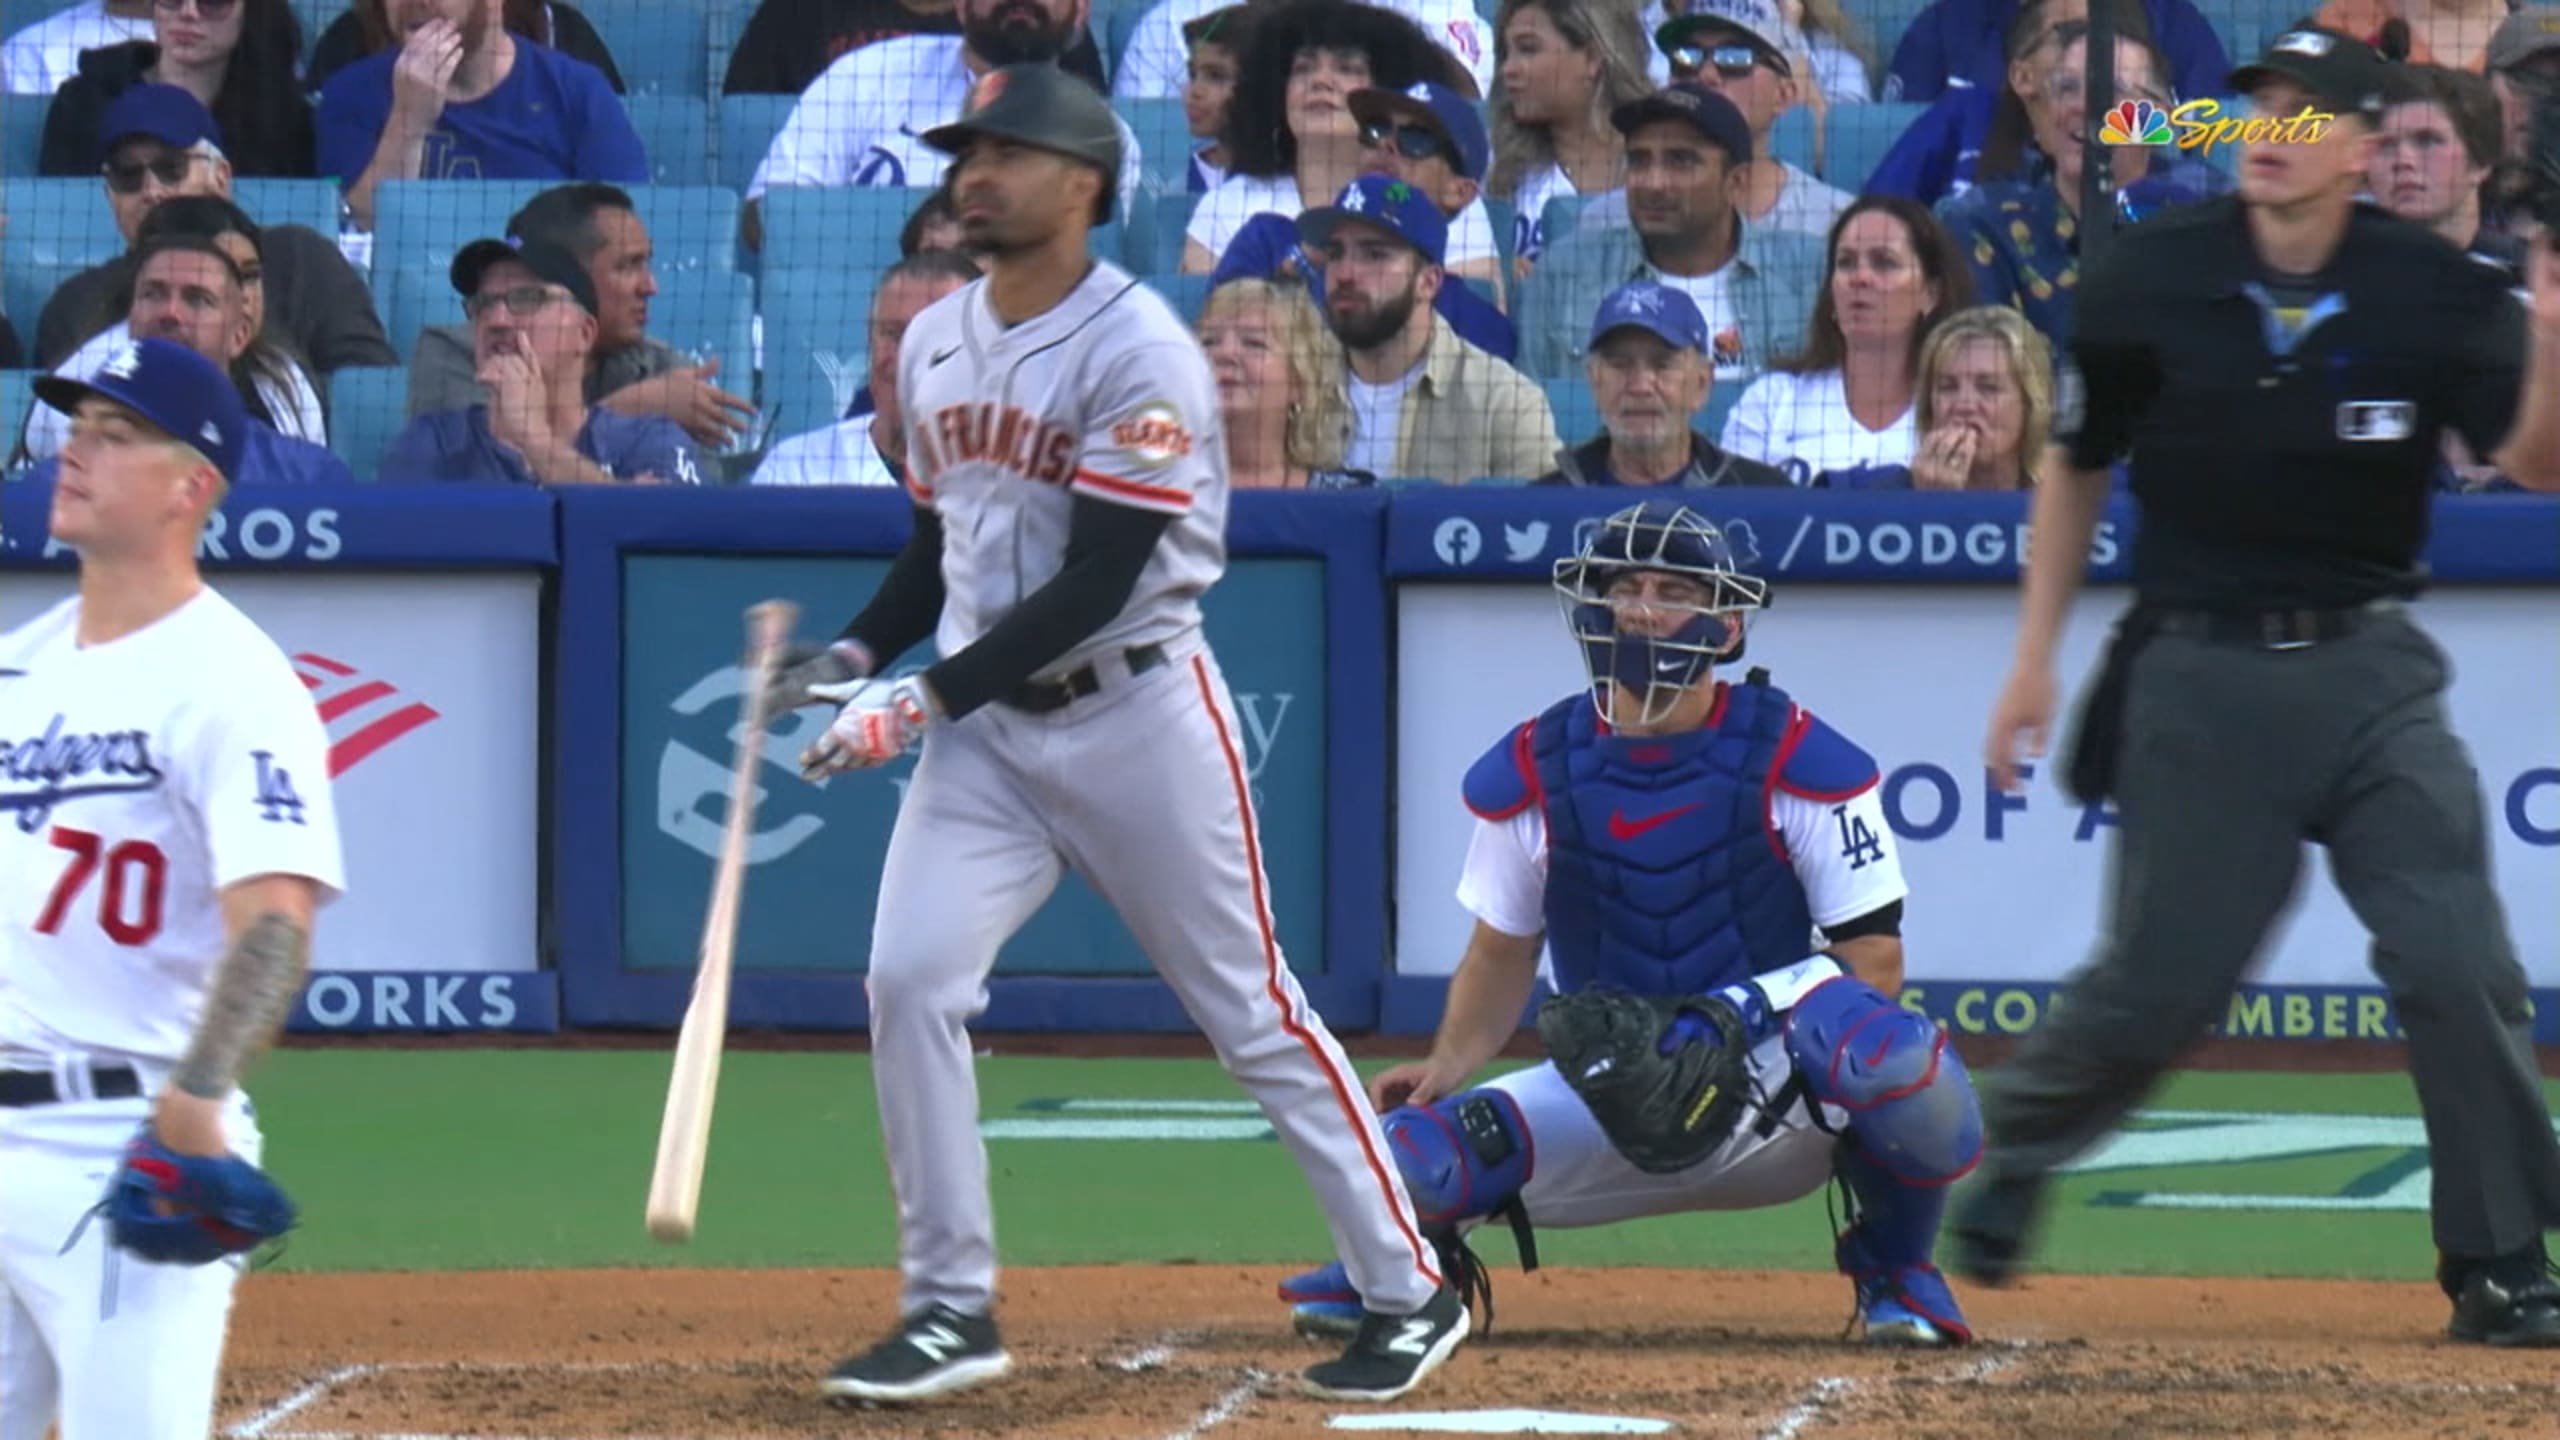 Giants beat Dodgers in extras, stave off elimination